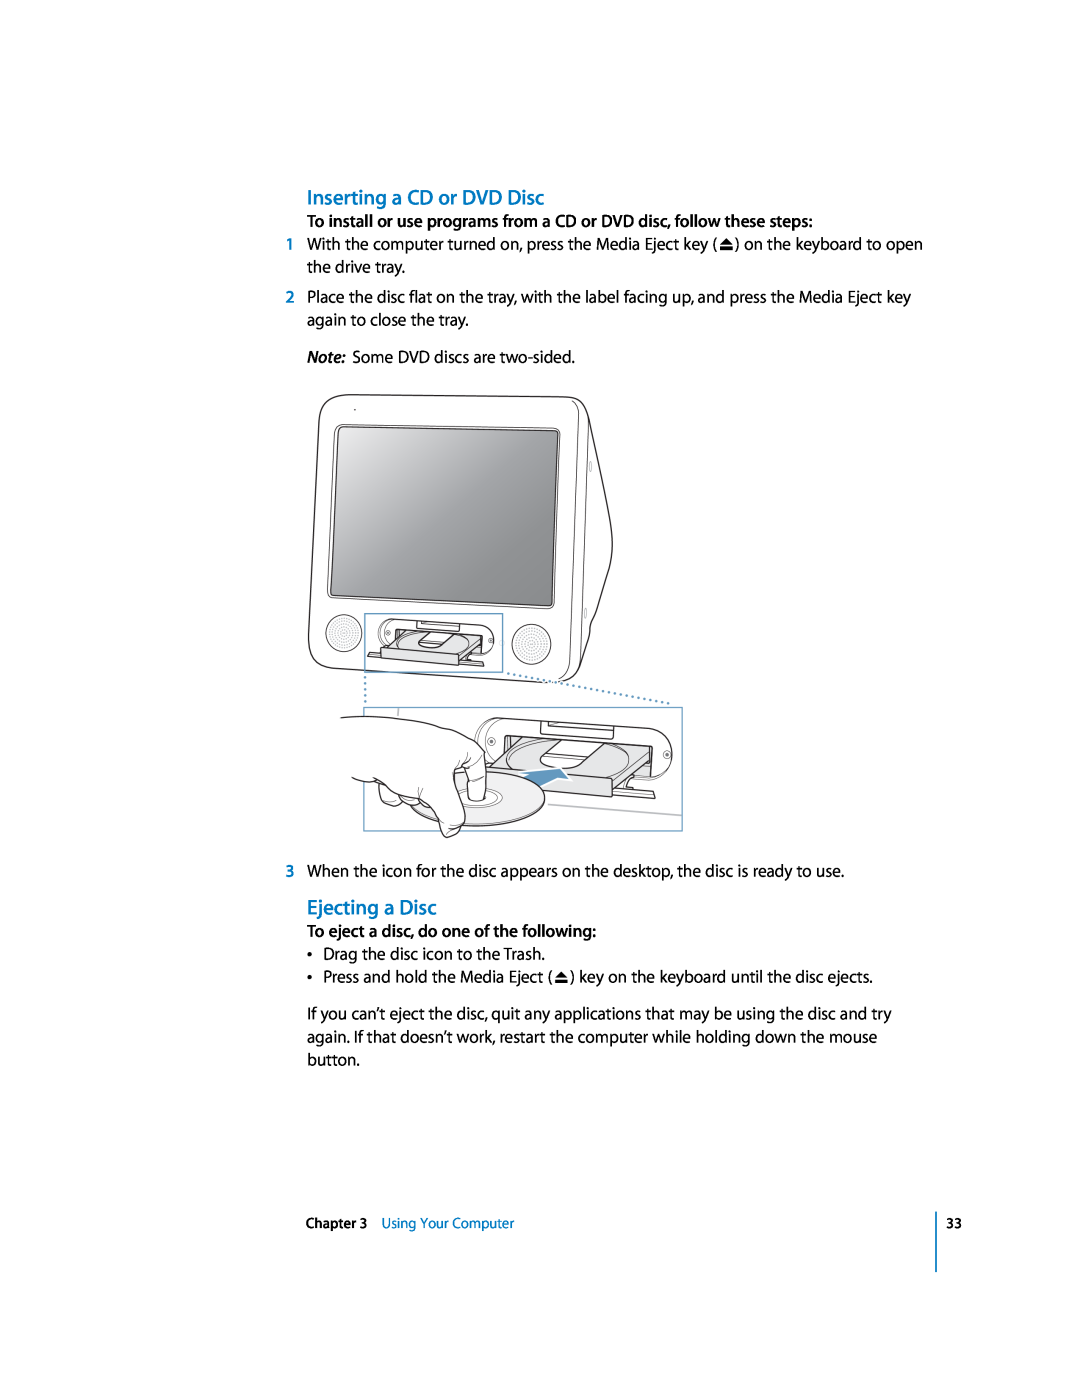 Apple EMac manual Inserting a CD or DVD Disc, Ejecting a Disc, To eject a disc, do one of the following 